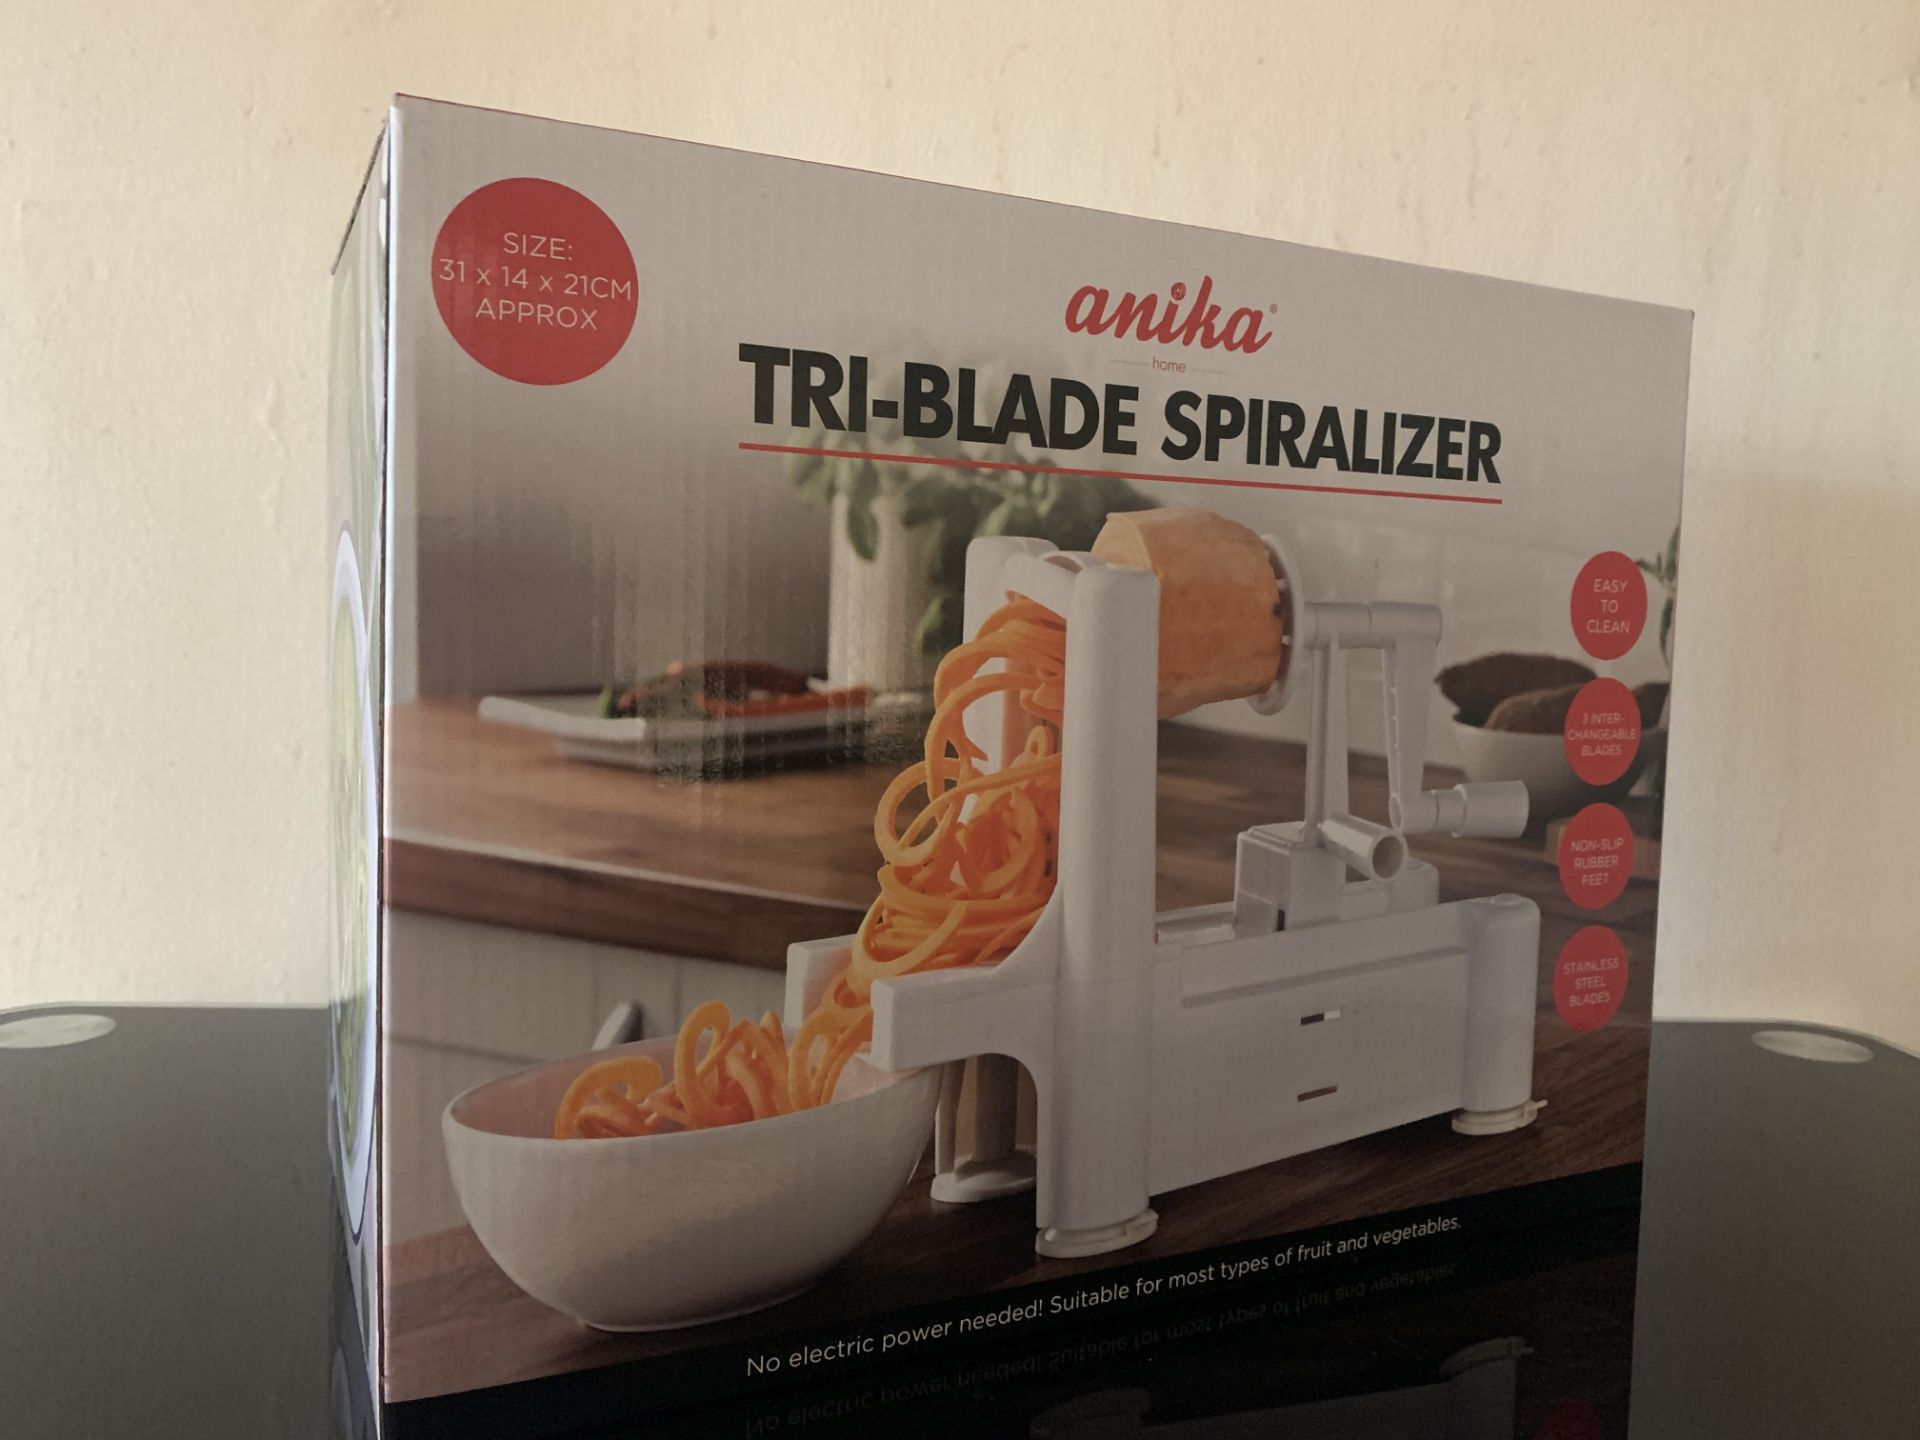 12 X BRAND NEW ANIKA TRI-BLADE SPIRALIZERS IN 2 BOXES